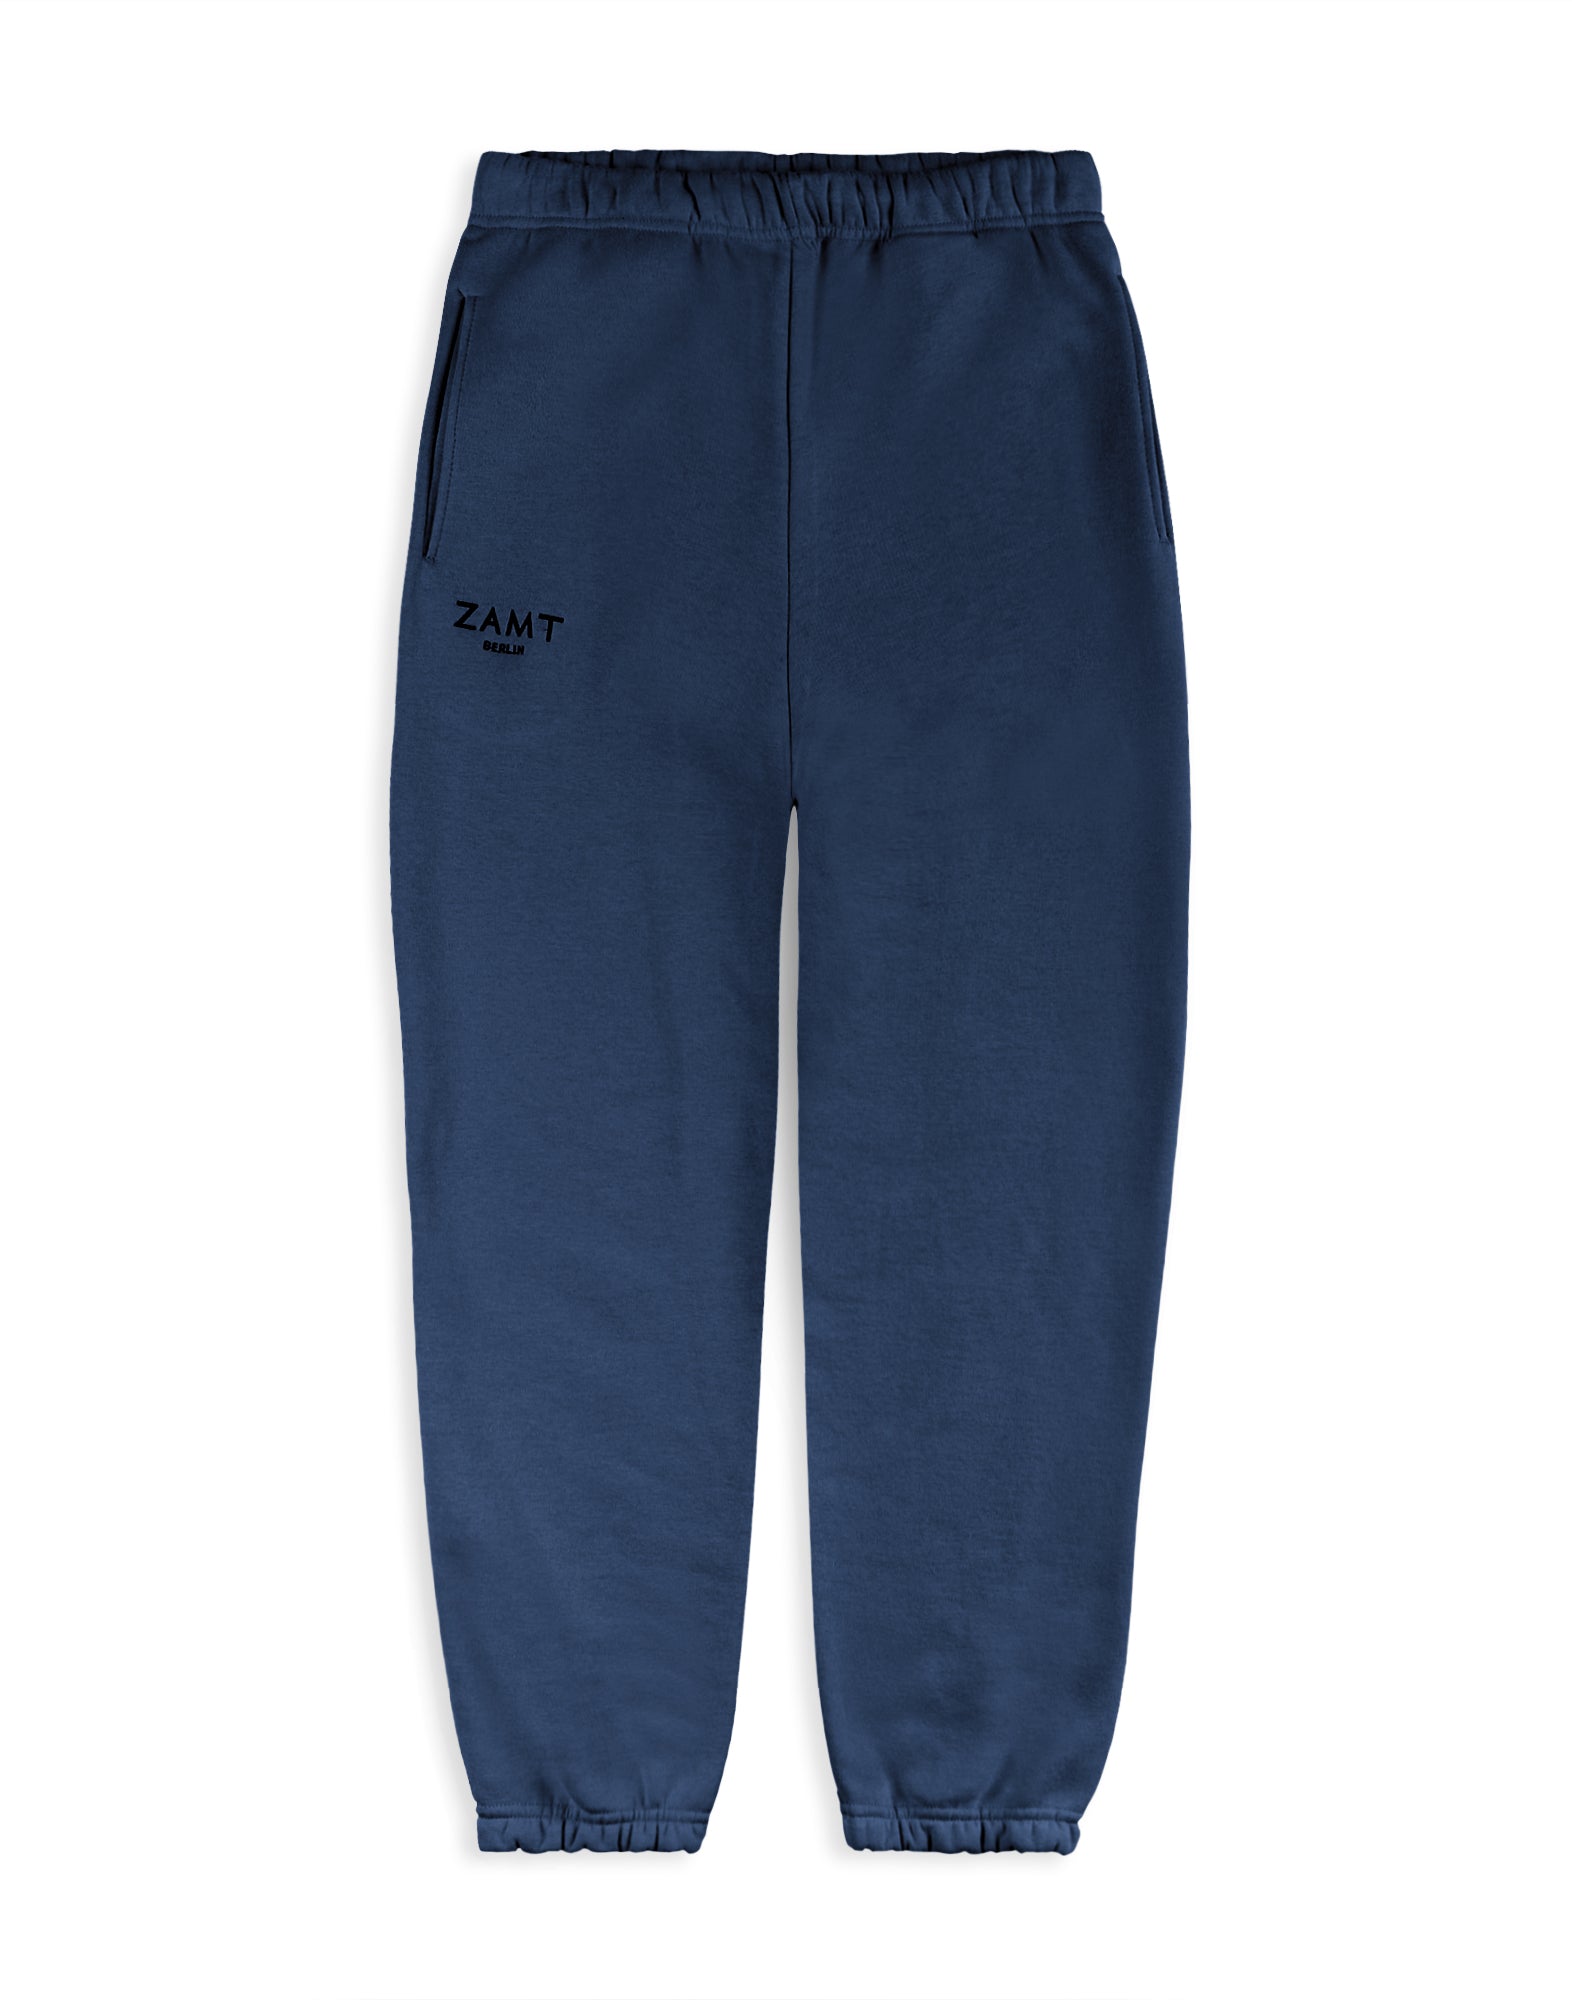 FAVORITE_03_SWEATPANTS_NAVY_Designed_in_Berlin_Made_to_last_Handmade_in_Poland.